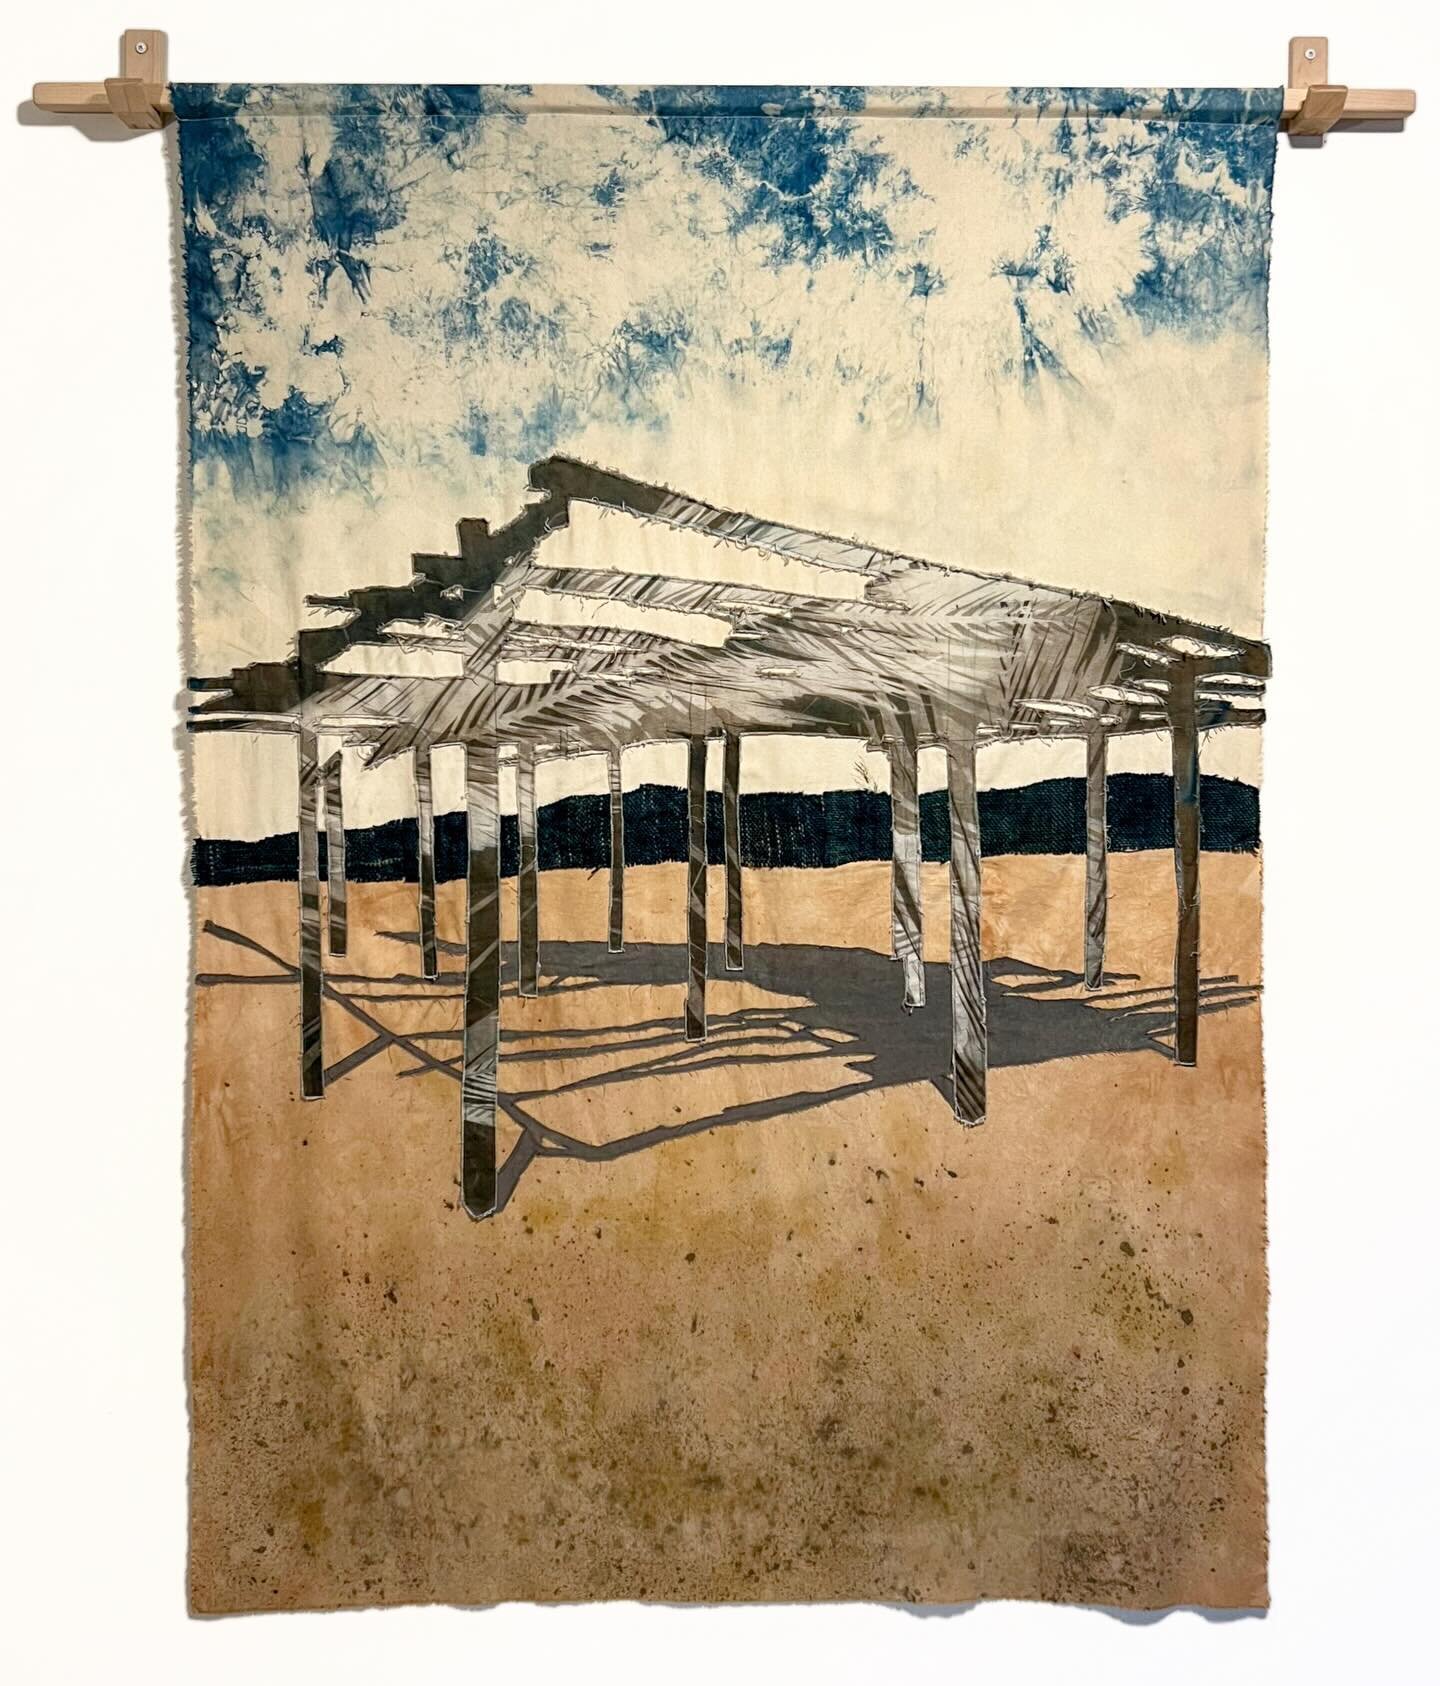 My piece &ldquo;Salton Sea Flag&rdquo; will be included in the exhibition Forgotten Spaces at @roxburyartsgroup opening next weekend. Looks like it will be a wonderful show, I hope some of my Hudson Valley friends will be able to check it out! 💙

&l